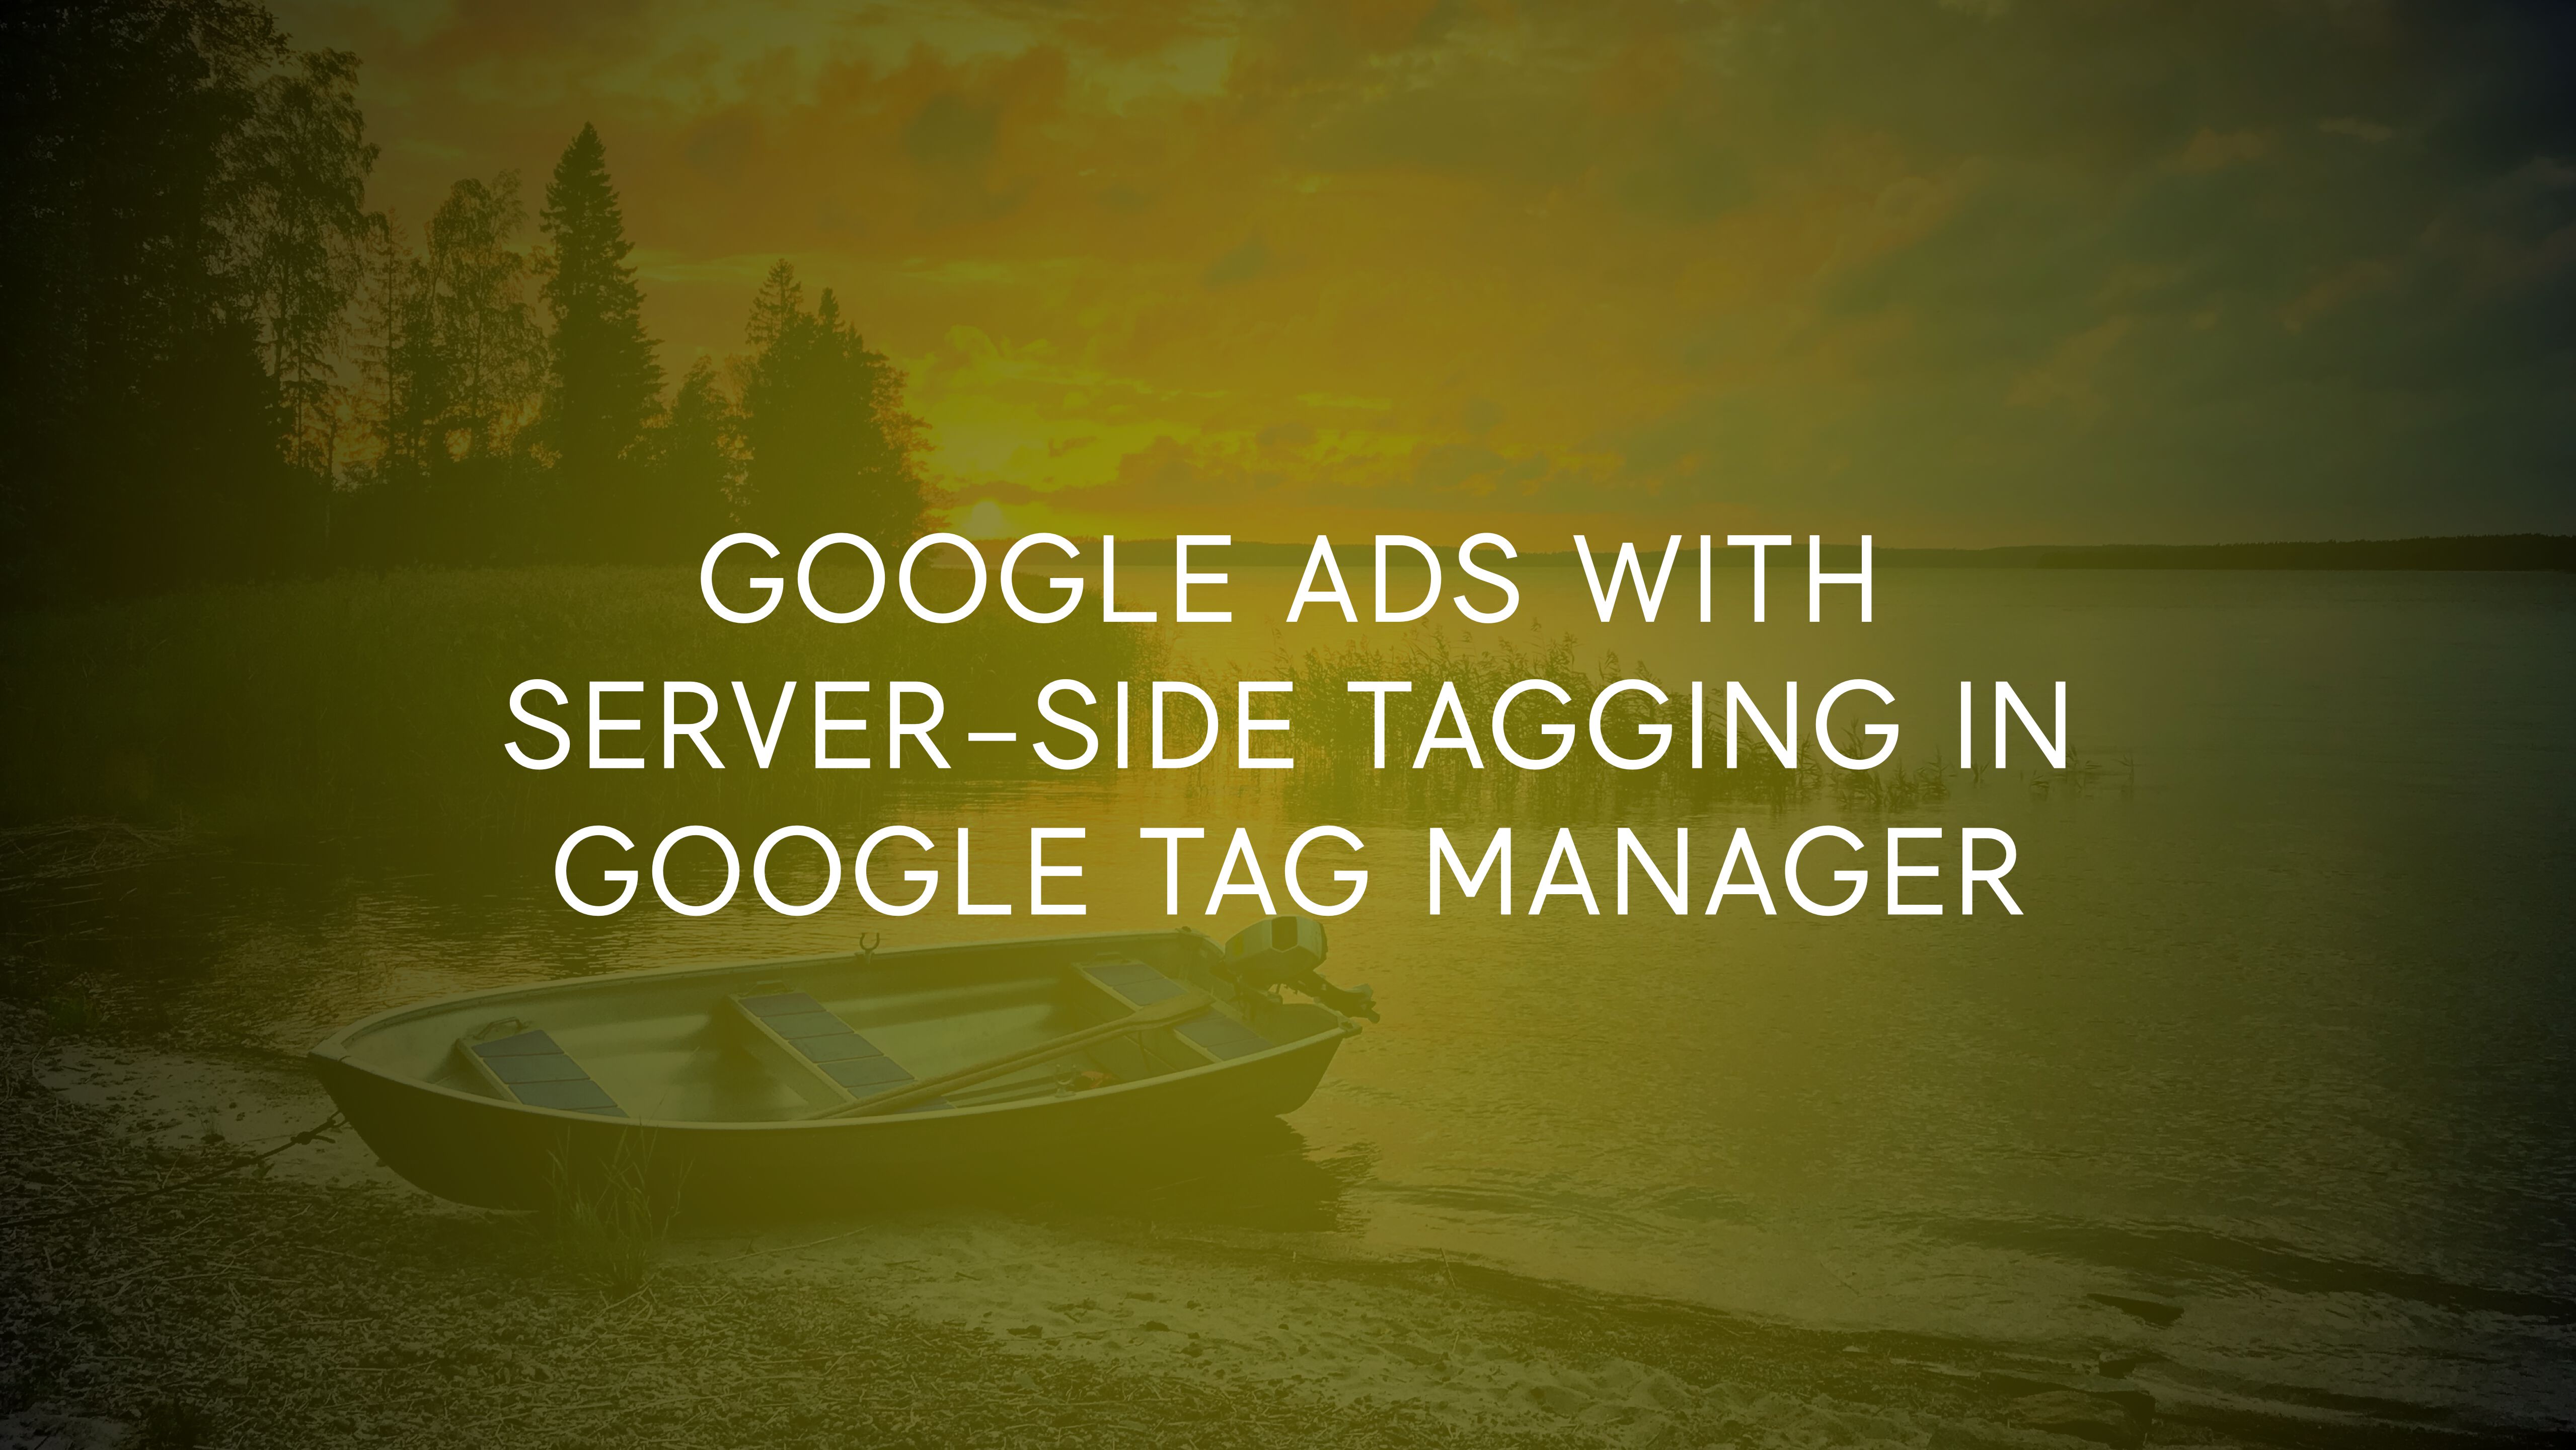 Google Ads Conversion Tracking With Server-side Tagging In Google Tag Manager